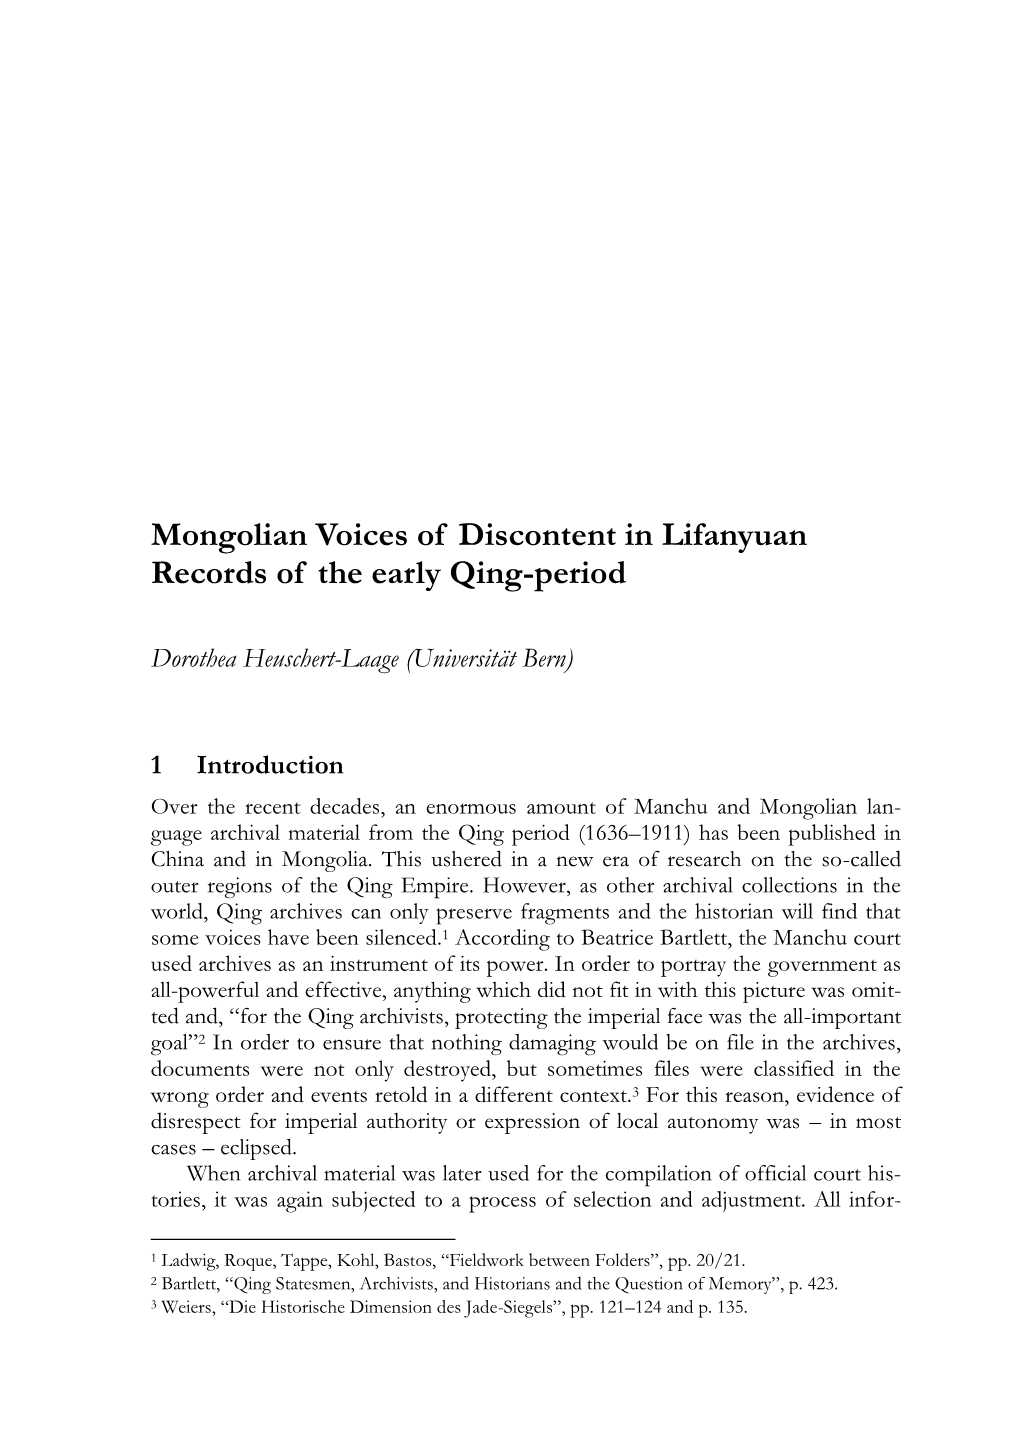 Mongolian Voices of Discontent in Lifanyuan Records of the Early Qing-Period